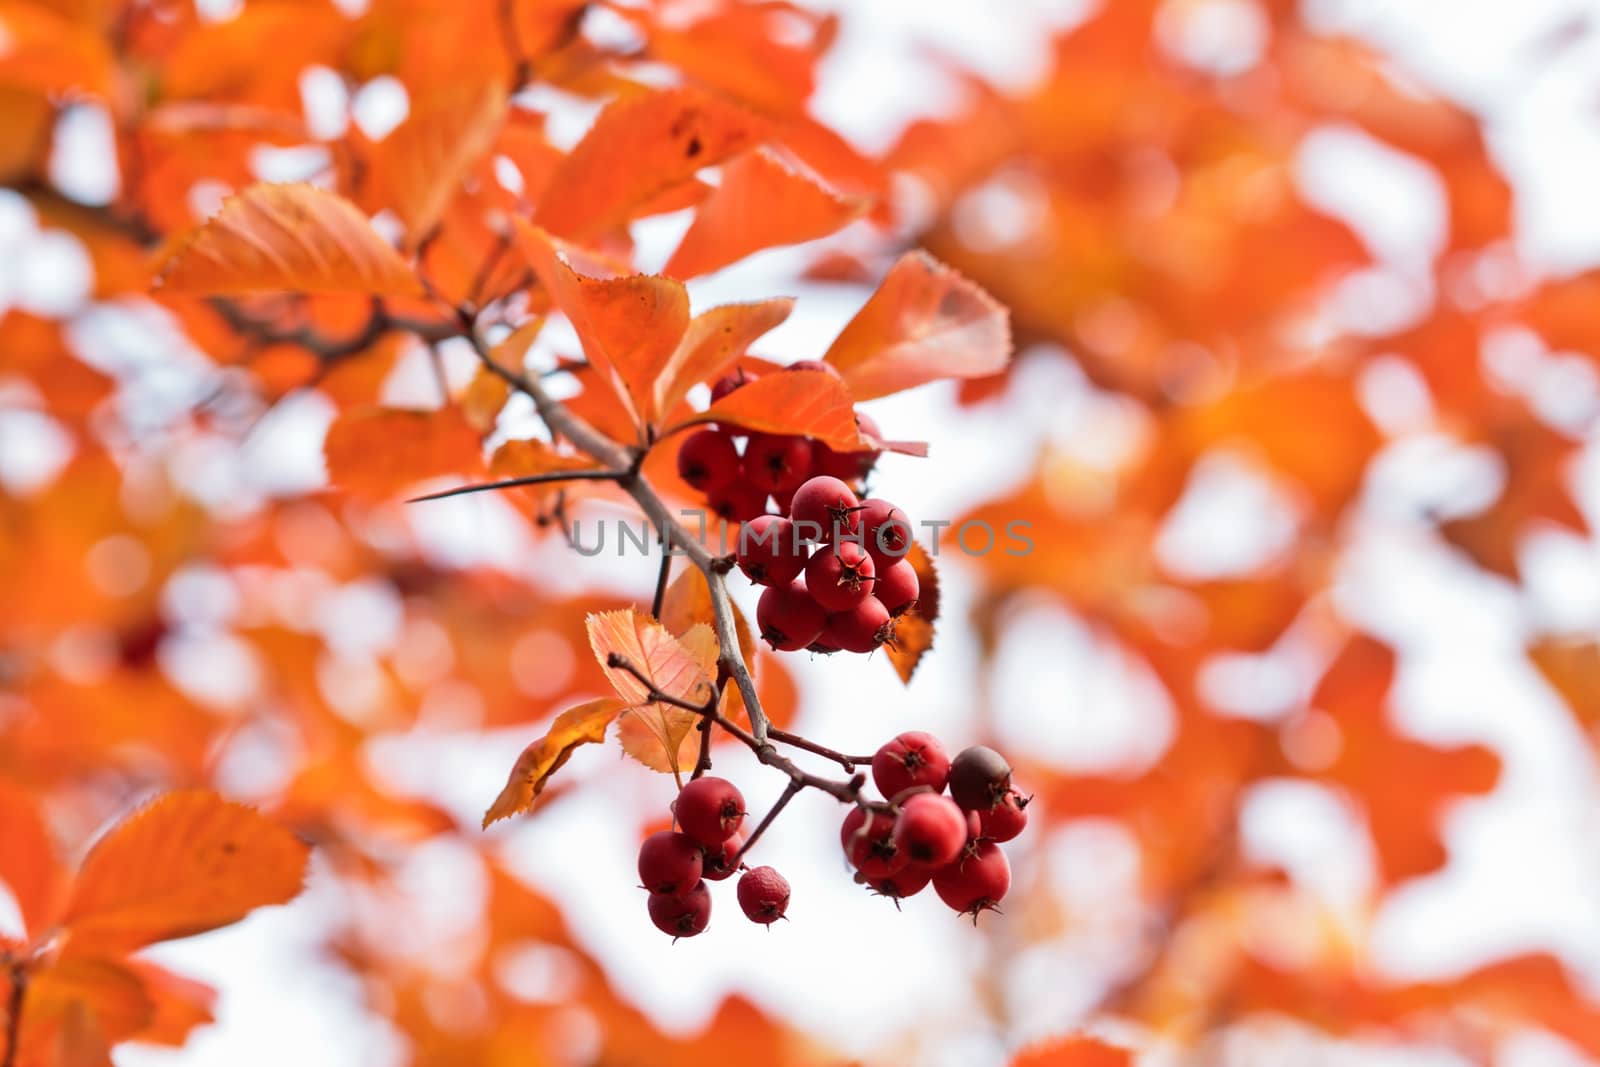 Colors of Fall (red berries over defocused orange foliage backgr by dsmsoft